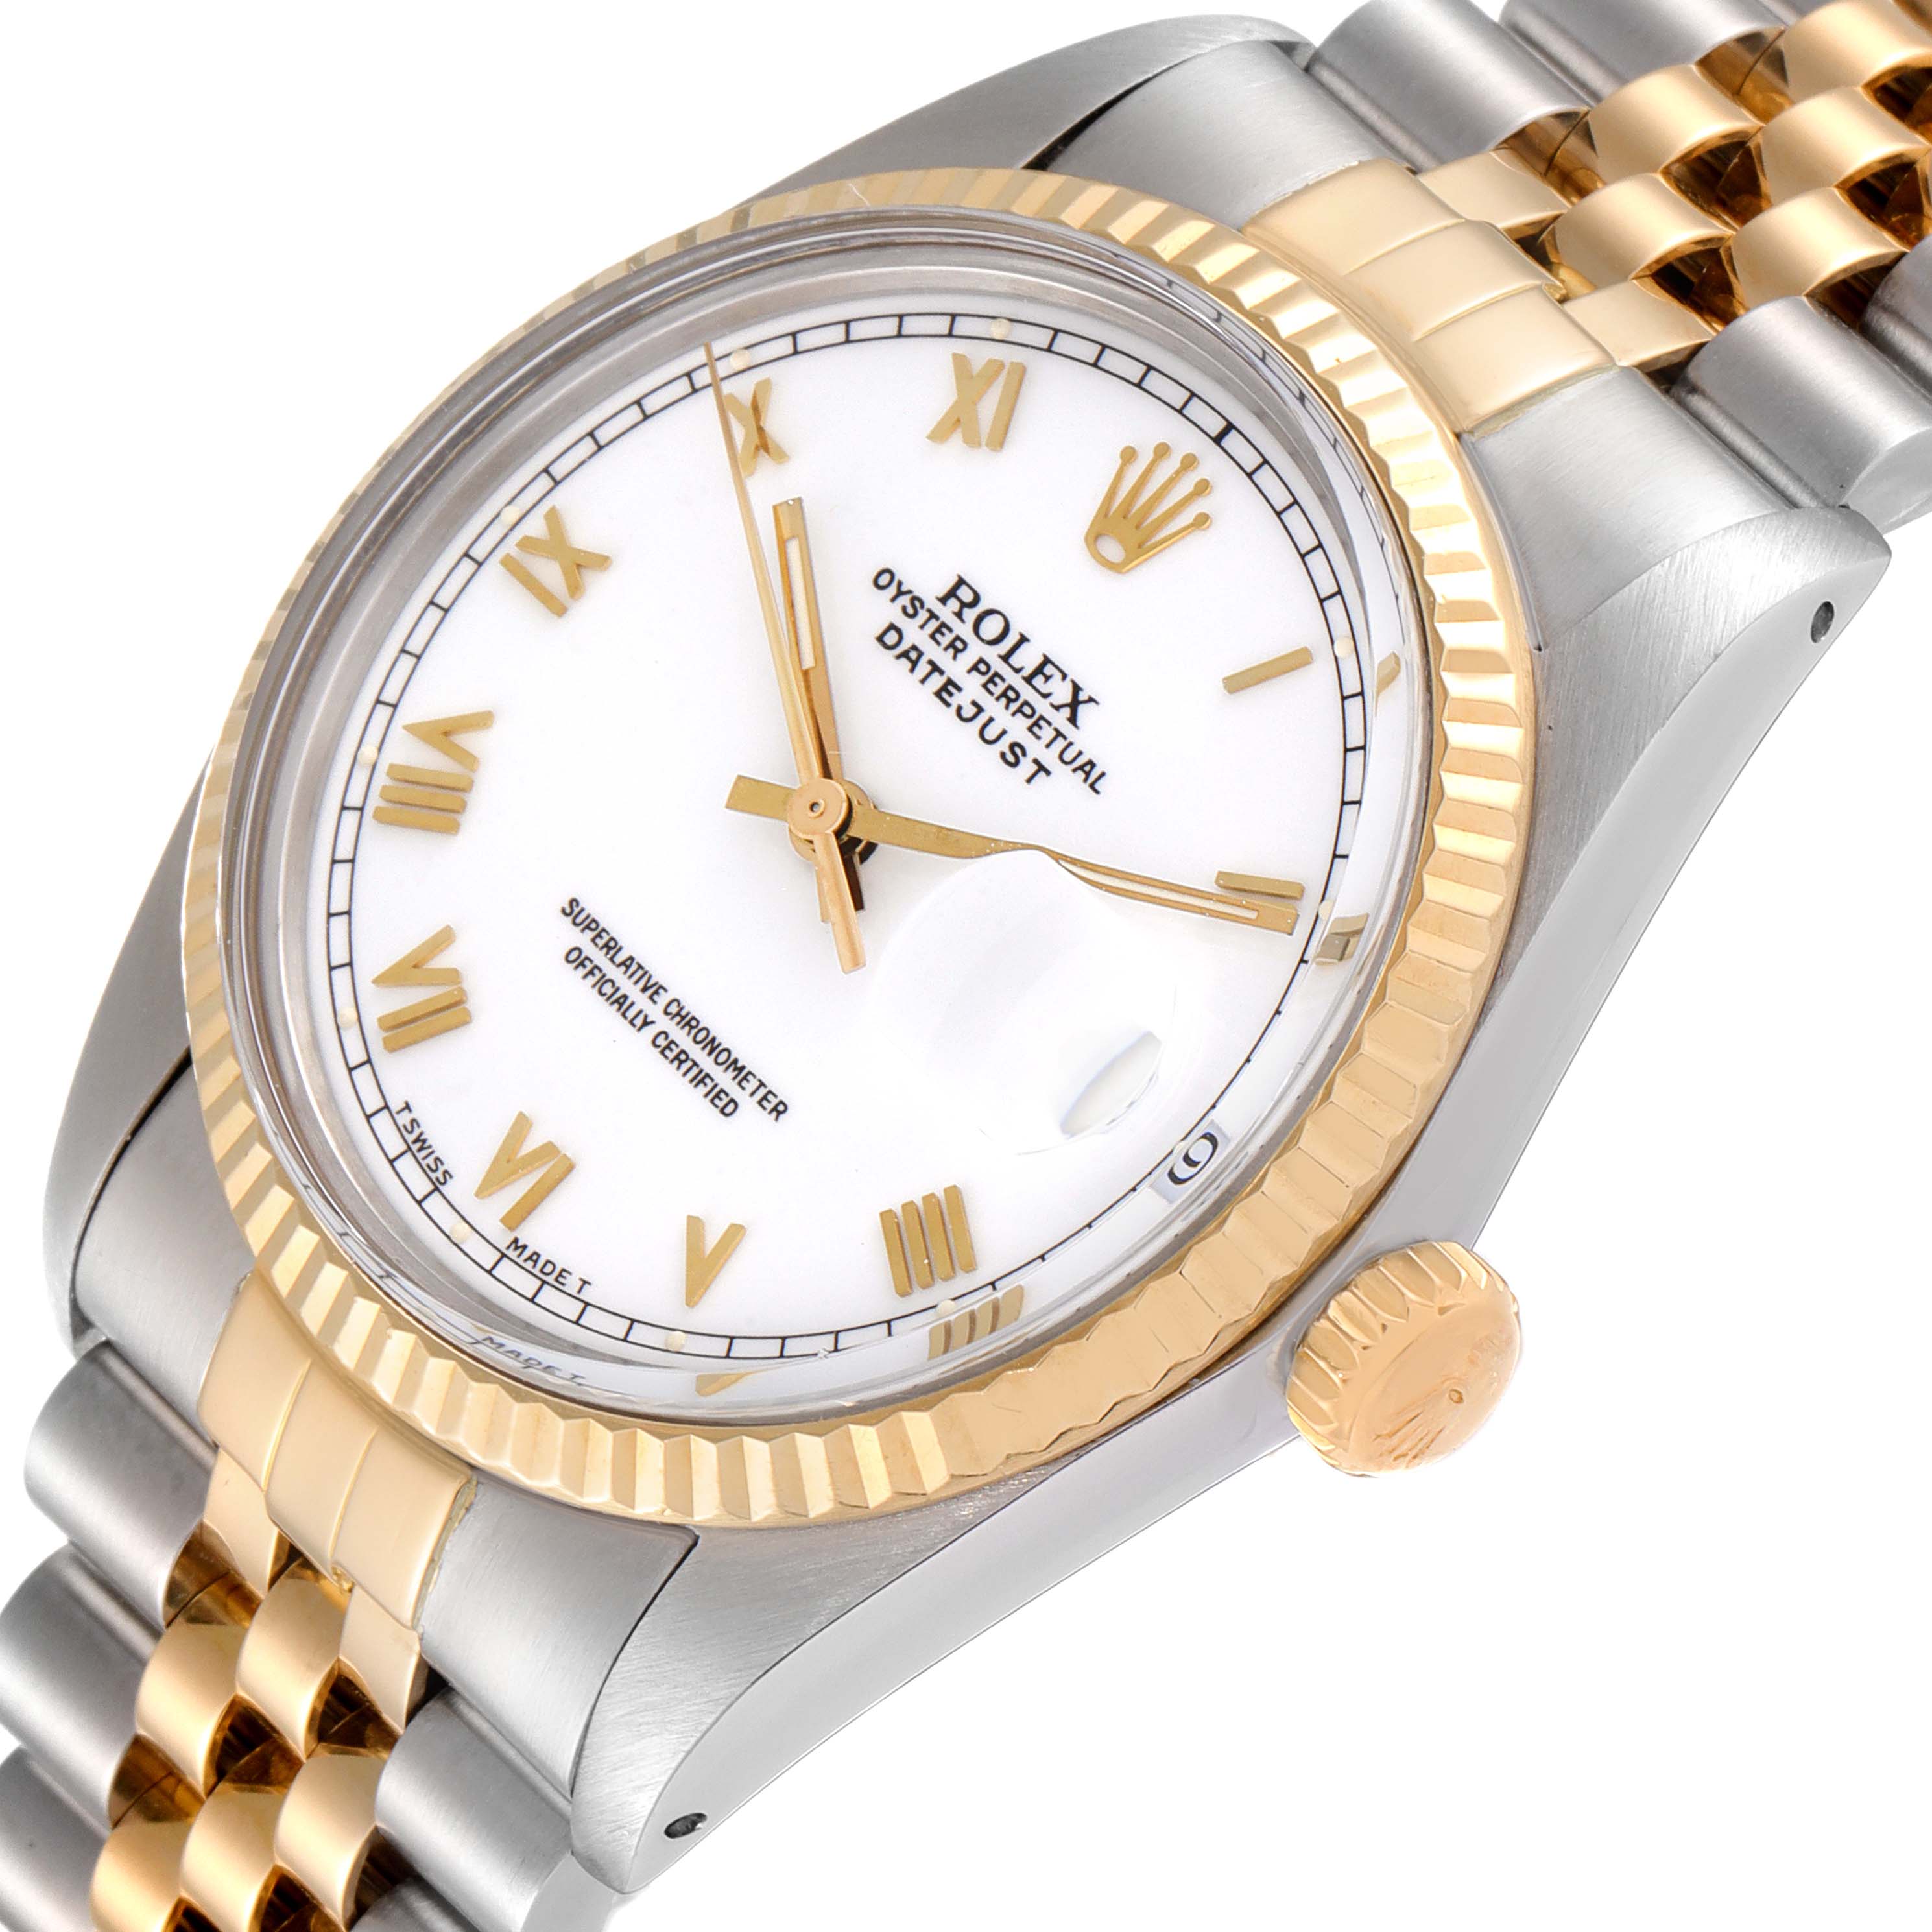 Rolex Datejust Steel Yellow Gold White Dial Vintage Mens Watch 16013 ...